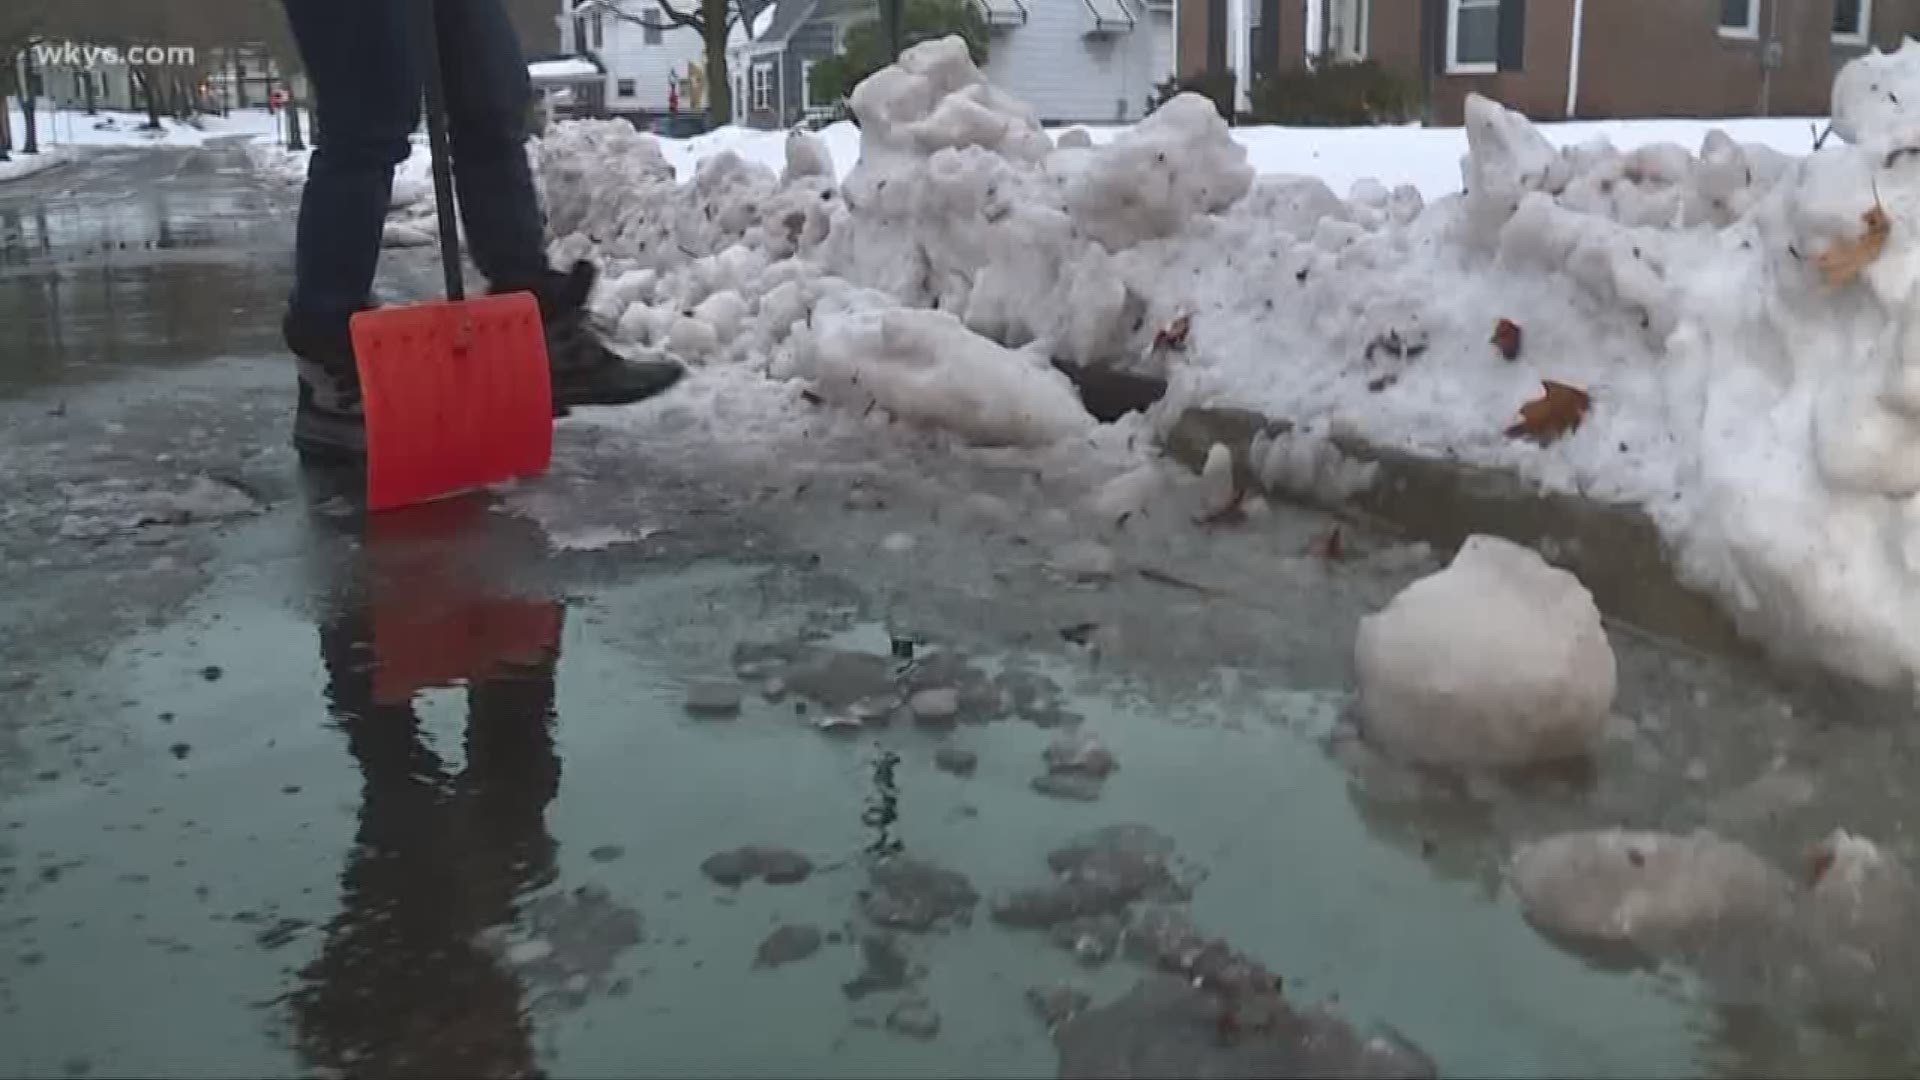 City of Akron drops the ball plowing its streets